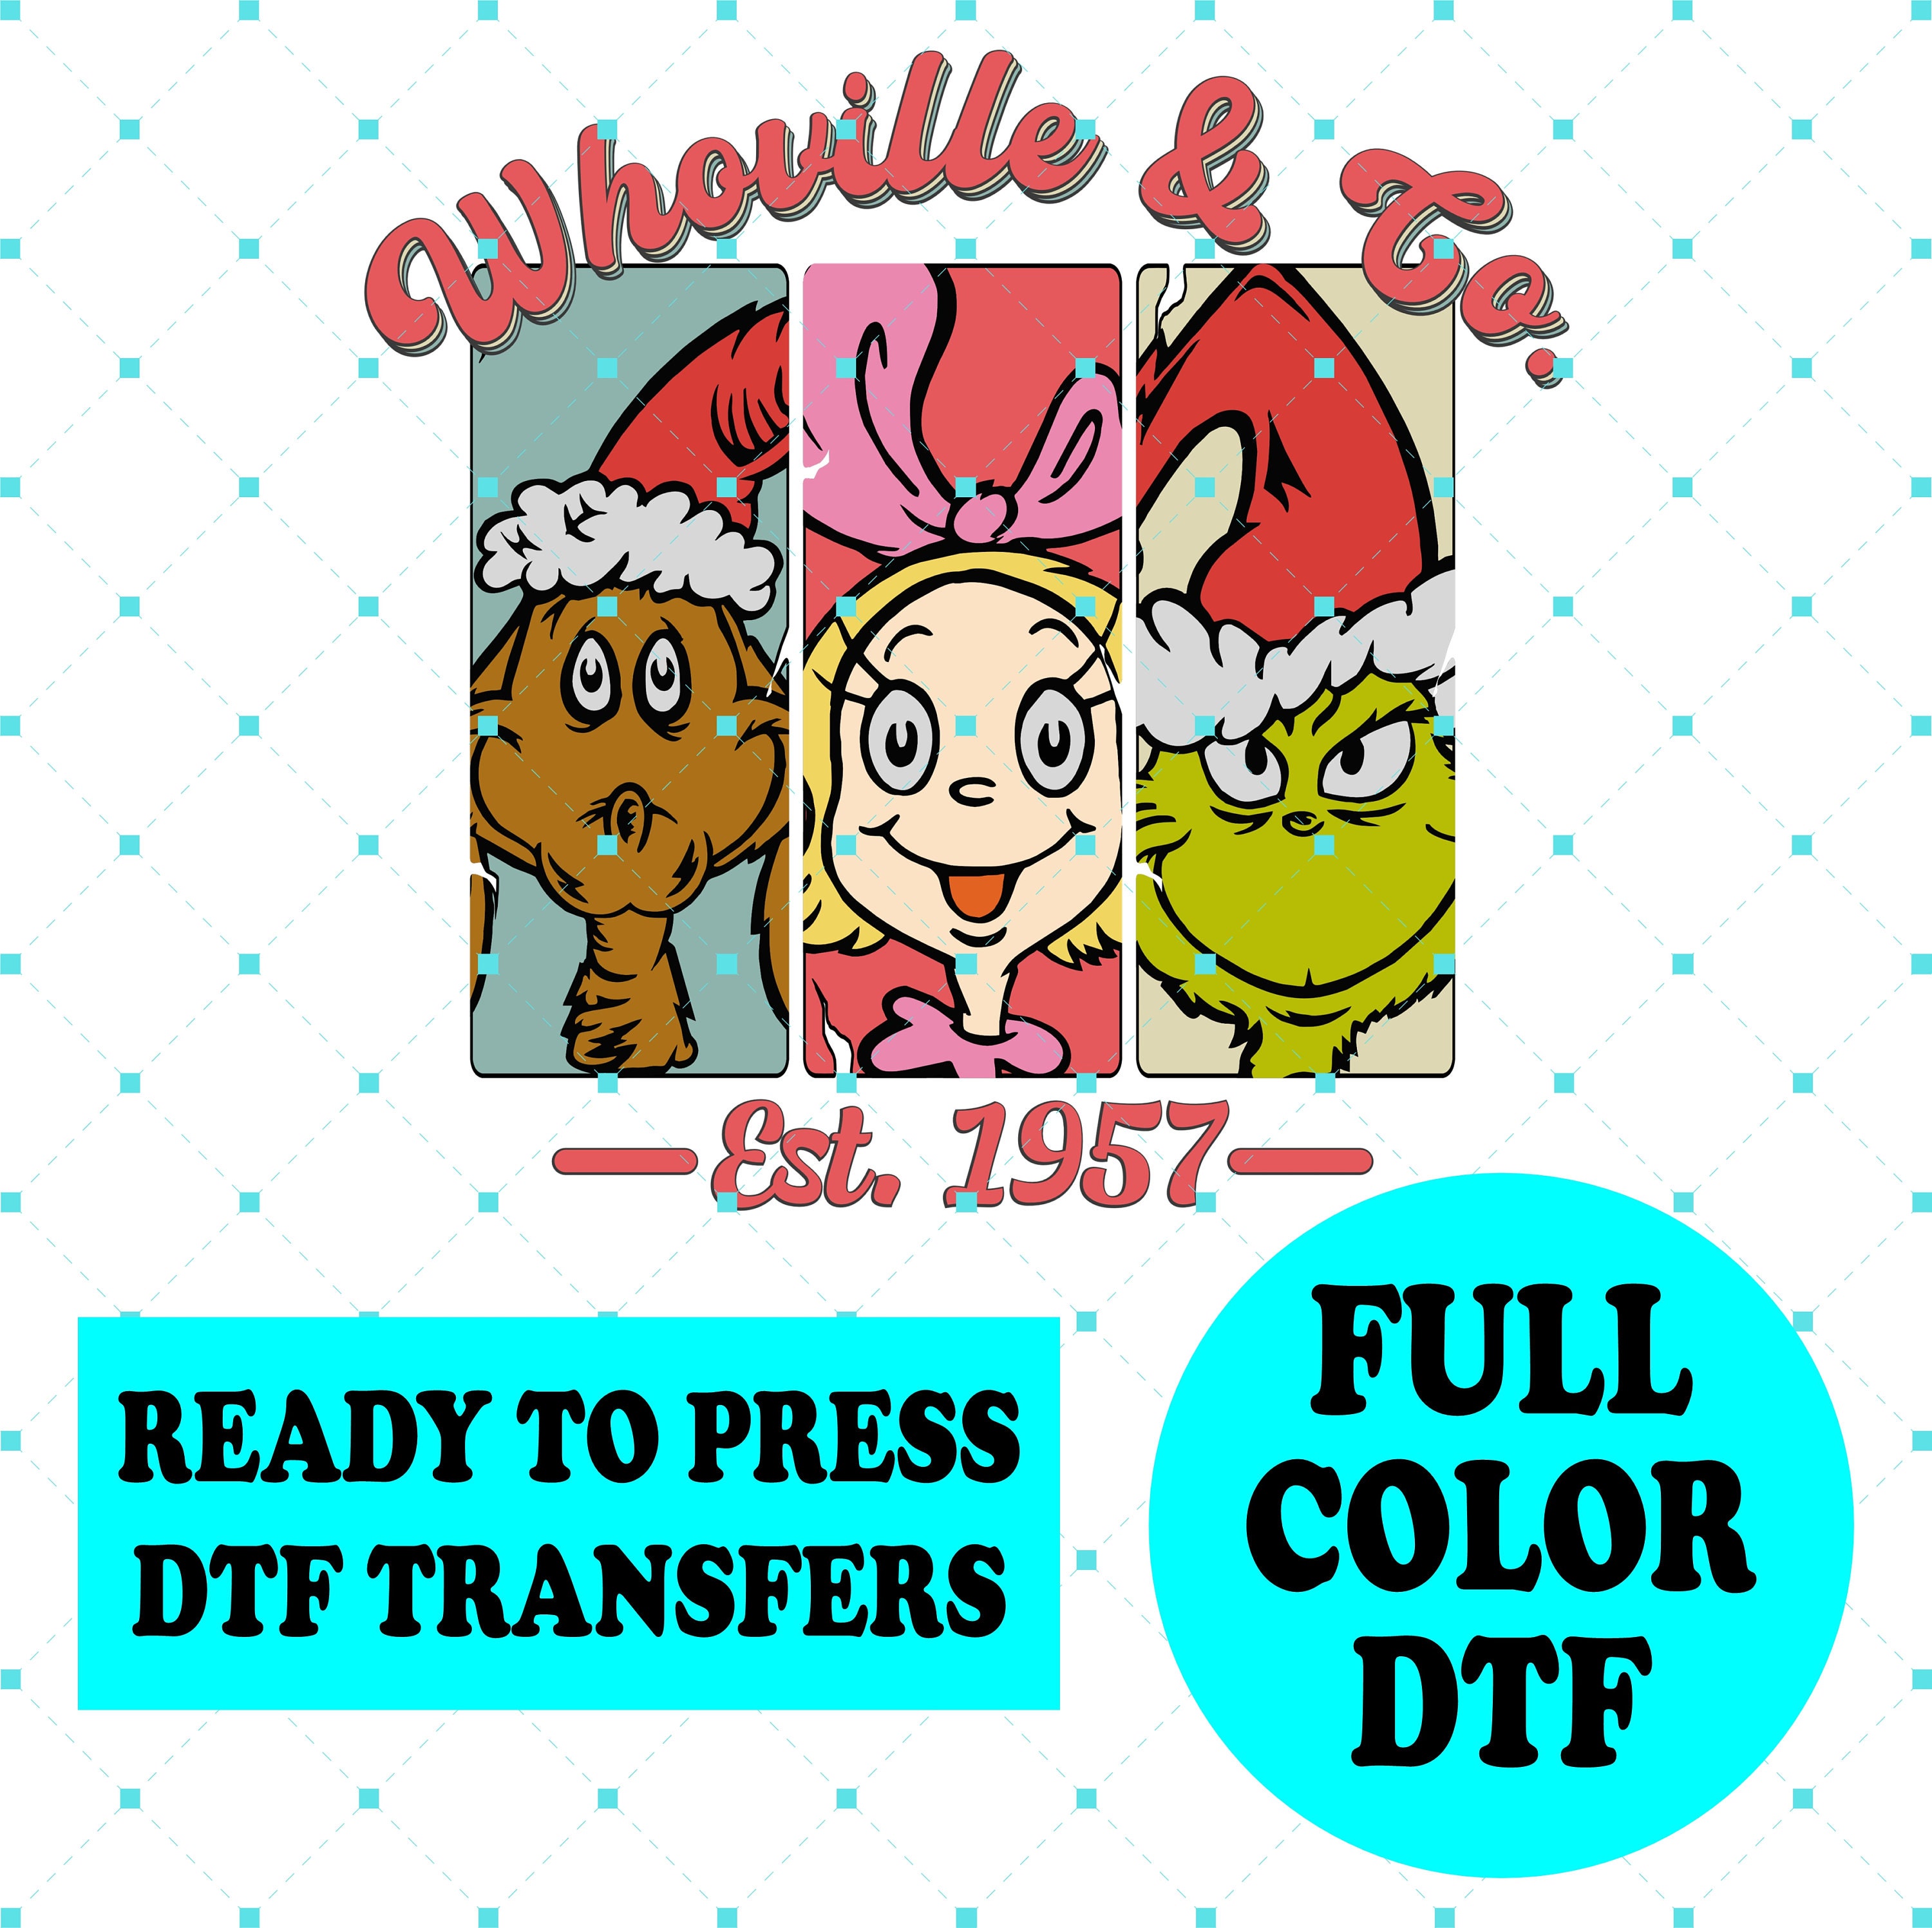 DTF Transfers, Ready to Press, T-shirt Transfers, Heat Transfer, Direct to  Film, Christmas DTF Transfers, Whoville & Co. 